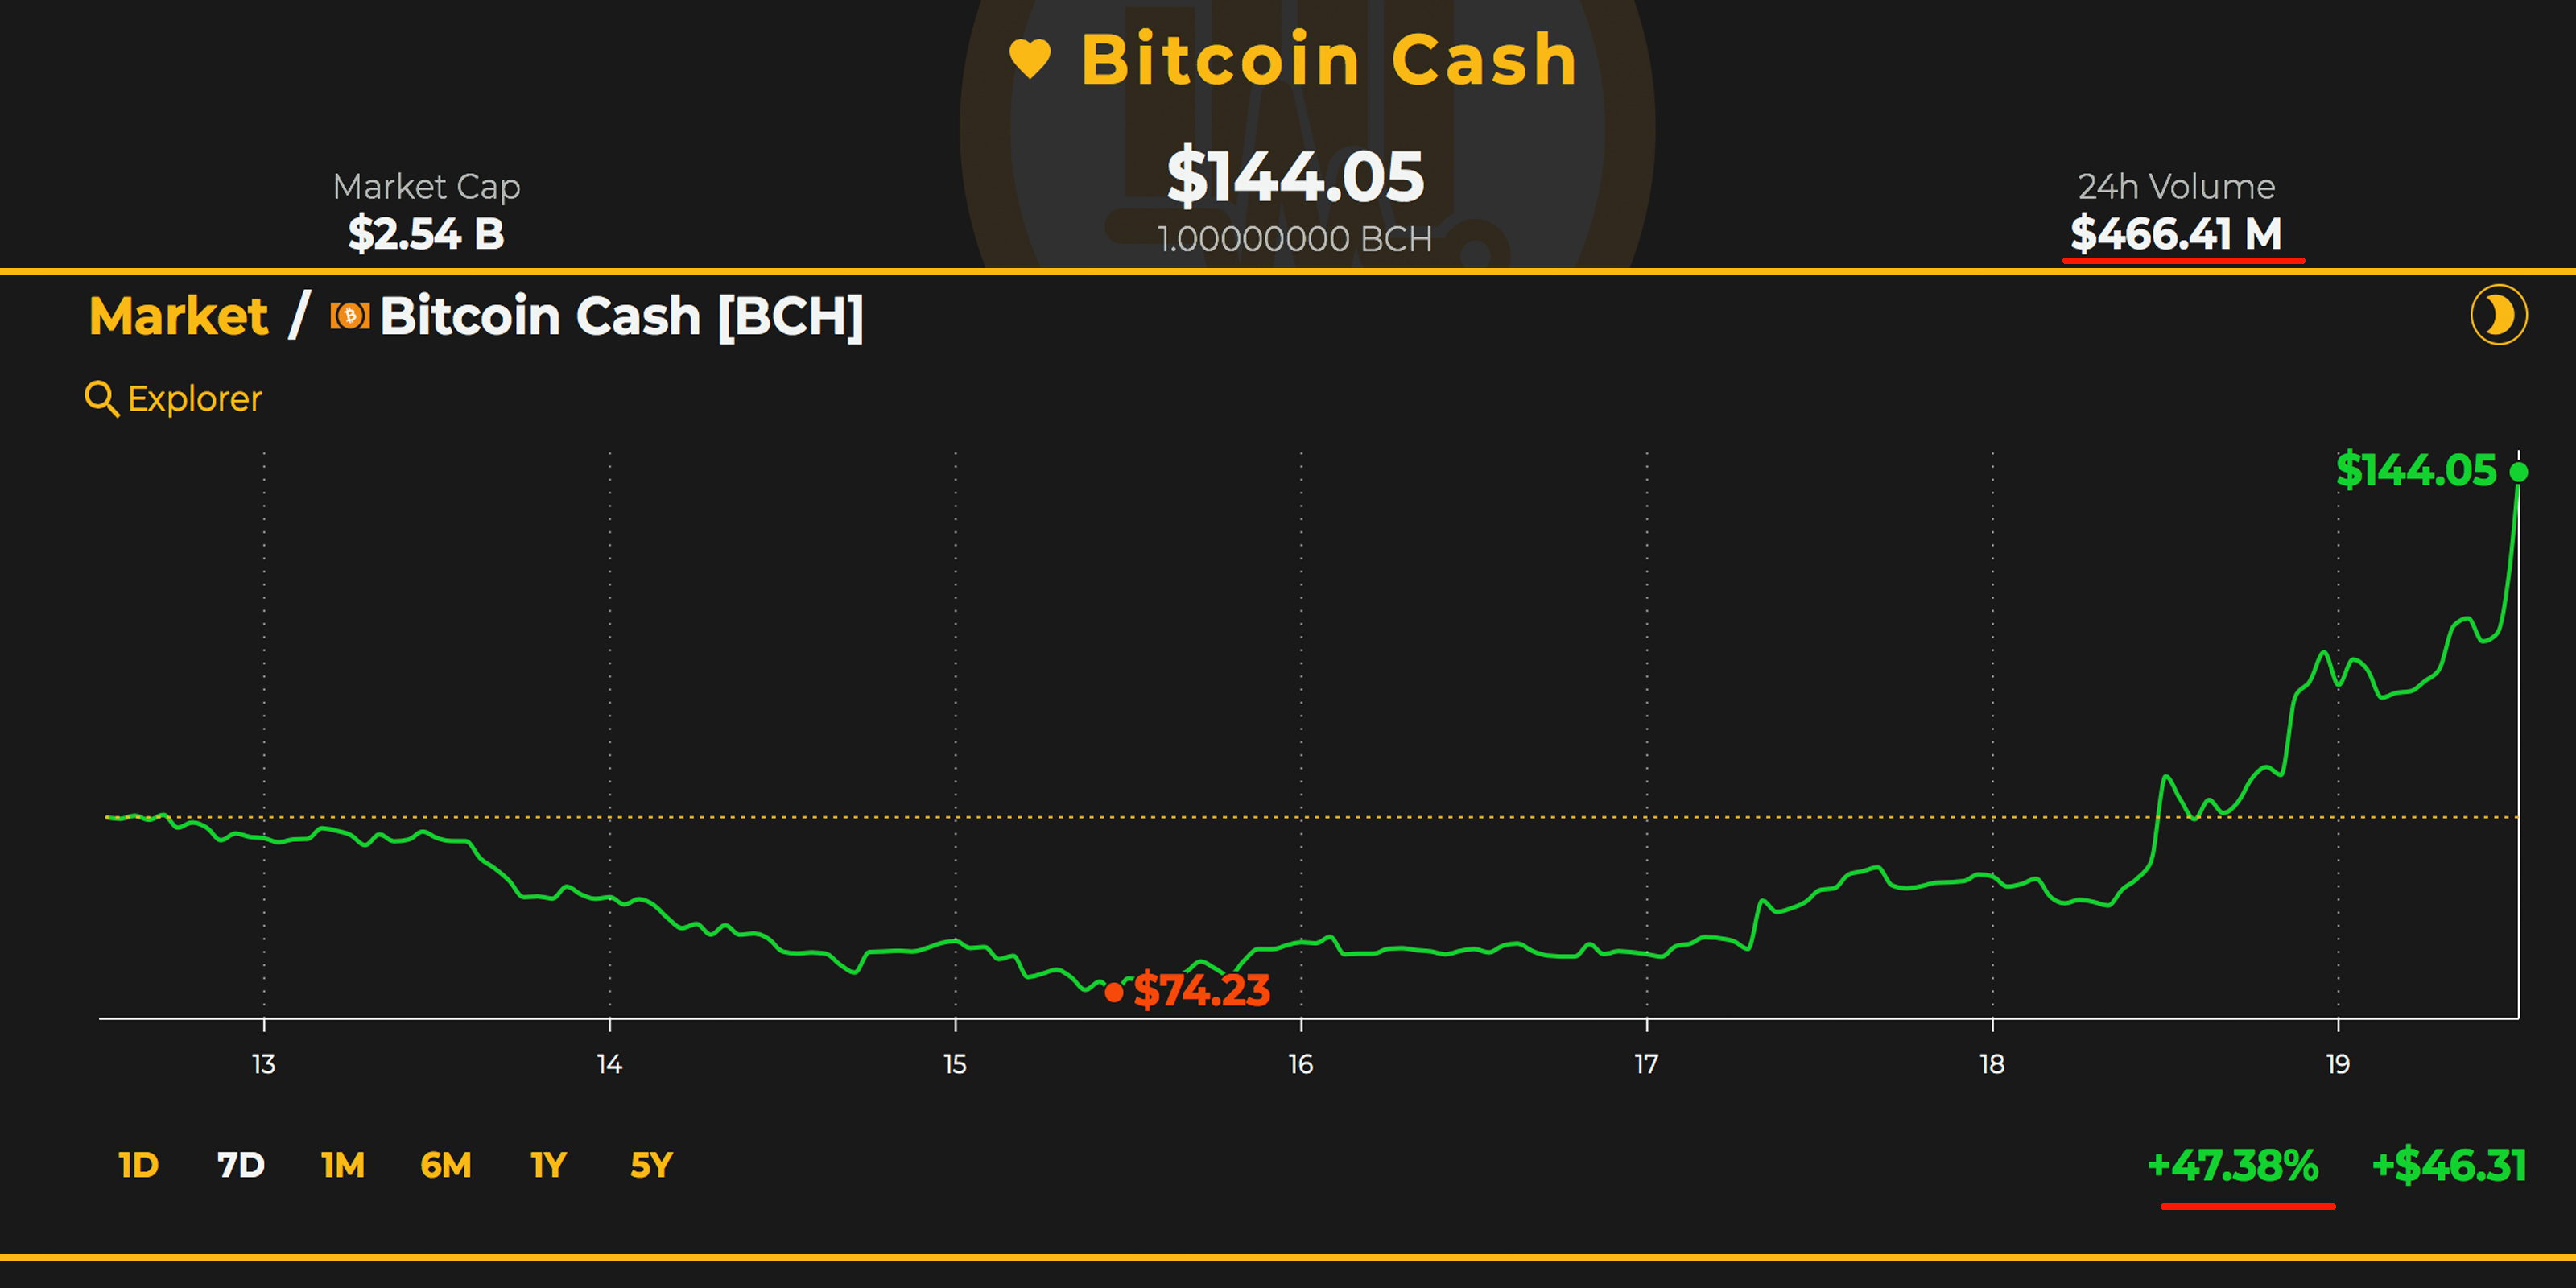 Hash Wars: BCH Proponents Face a New Dawn in the Battle's Aftermath